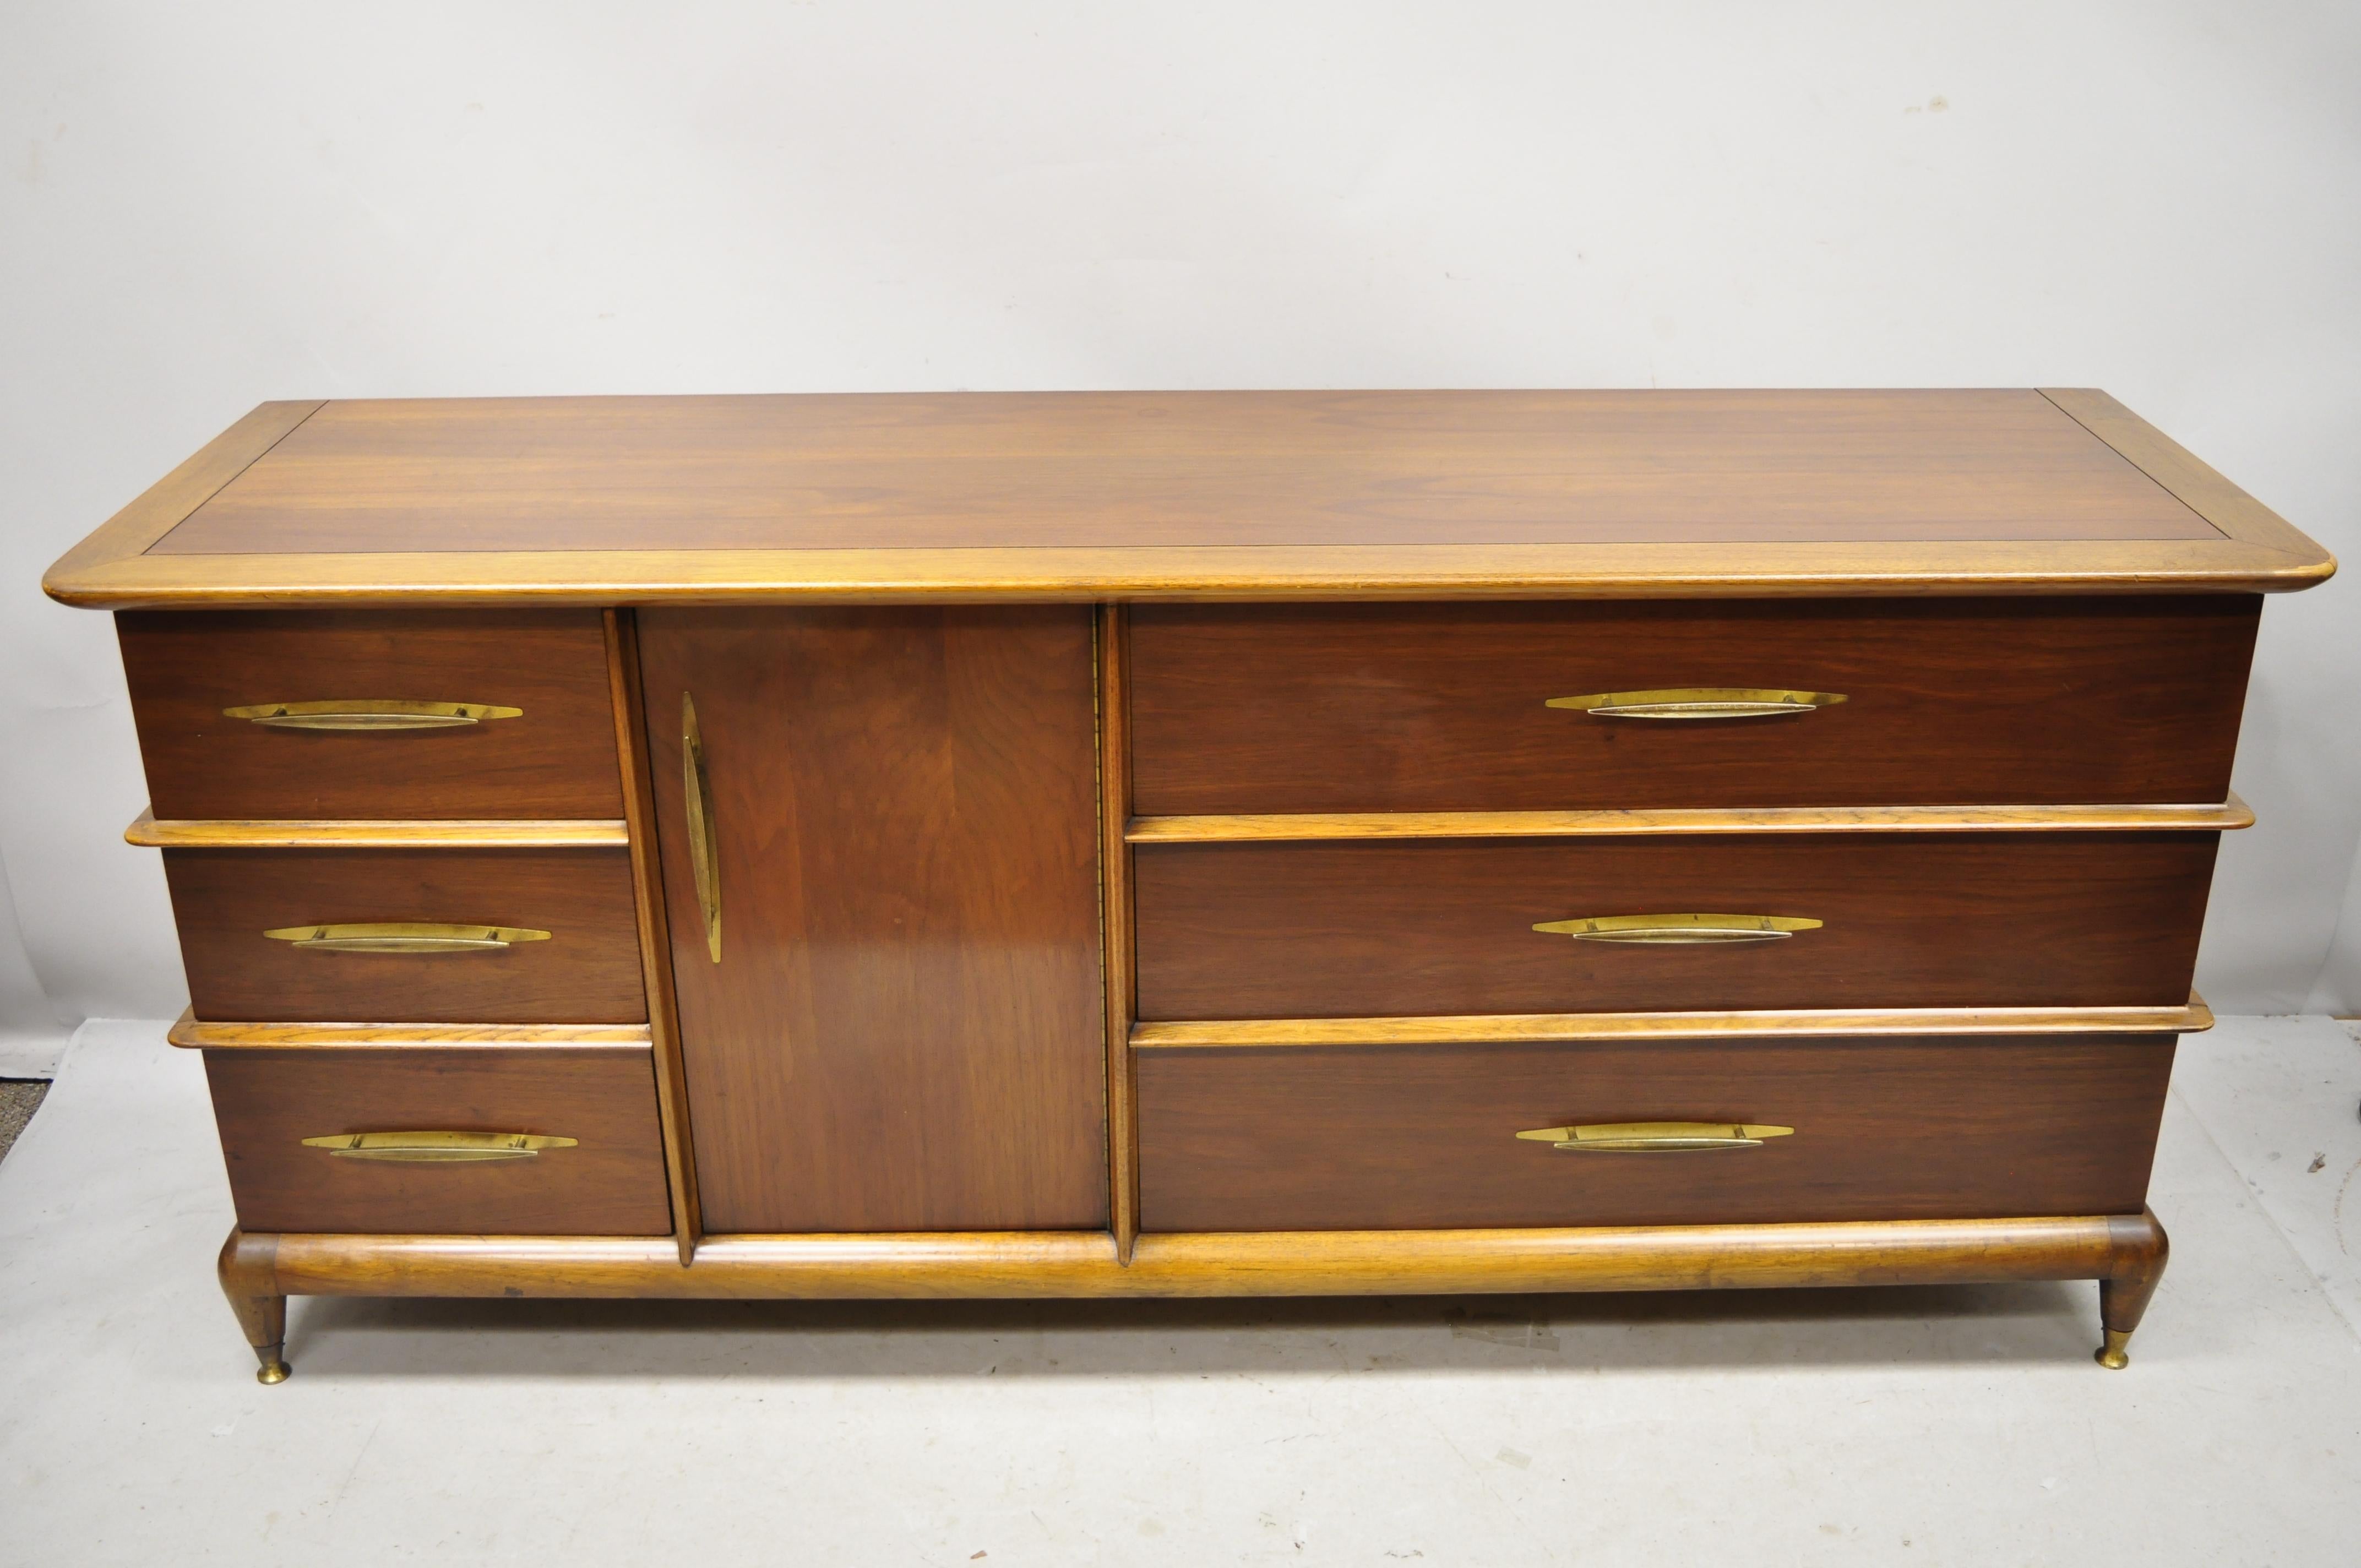 Kent Coffey The Appointment Midcentury Sculpted Walnut Credenza Cabinet Dresser 6